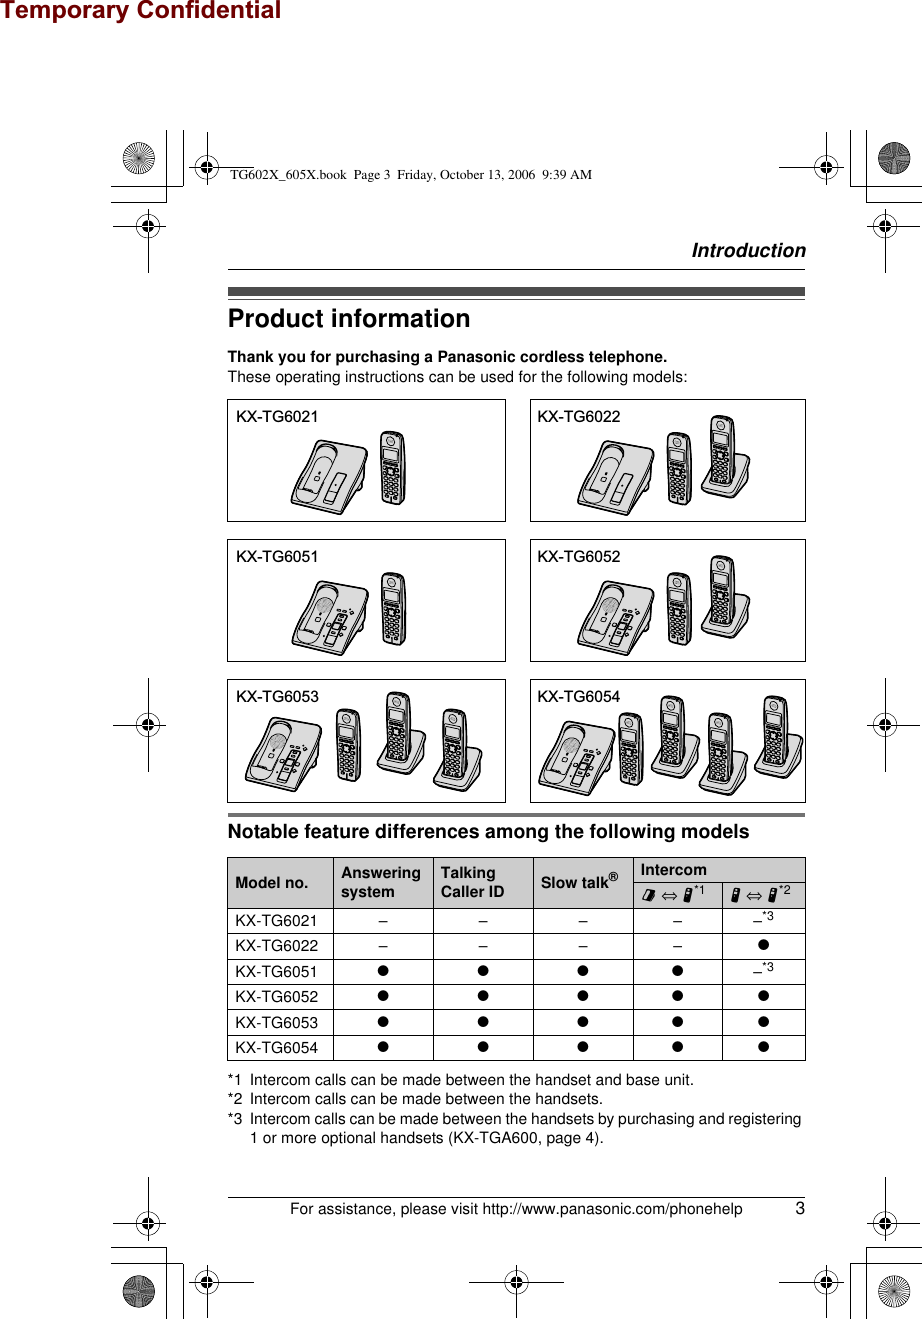 IntroductionFor assistance, please visit http://www.panasonic.com/phonehelp 3Product informationThank you for purchasing a Panasonic cordless telephone.These operating instructions can be used for the following models:Notable feature differences among the following models*1 Intercom calls can be made between the handset and base unit.*2 Intercom calls can be made between the handsets.*3 Intercom calls can be made between the handsets by purchasing and registering 1 or more optional handsets (KX-TGA600, page 4).Model no. Answering system Talking Caller ID Slow talk®Intercom \ ⇔ N*1 N ⇔ N*2KX-TG6021 – – – – –*3KX-TG6022 – – – – rKX-TG6051 rrrr–*3KX-TG6052 rrrrrKX-TG6053 rrrrrKX-TG6054 rrrrrKX-TG6021 KX-TG6022KX-TG6051 KX-TG6052KX-TG6053 KX-TG6054TG602X_605X.book  Page 3  Friday, October 13, 2006  9:39 AMTemporary Confidential